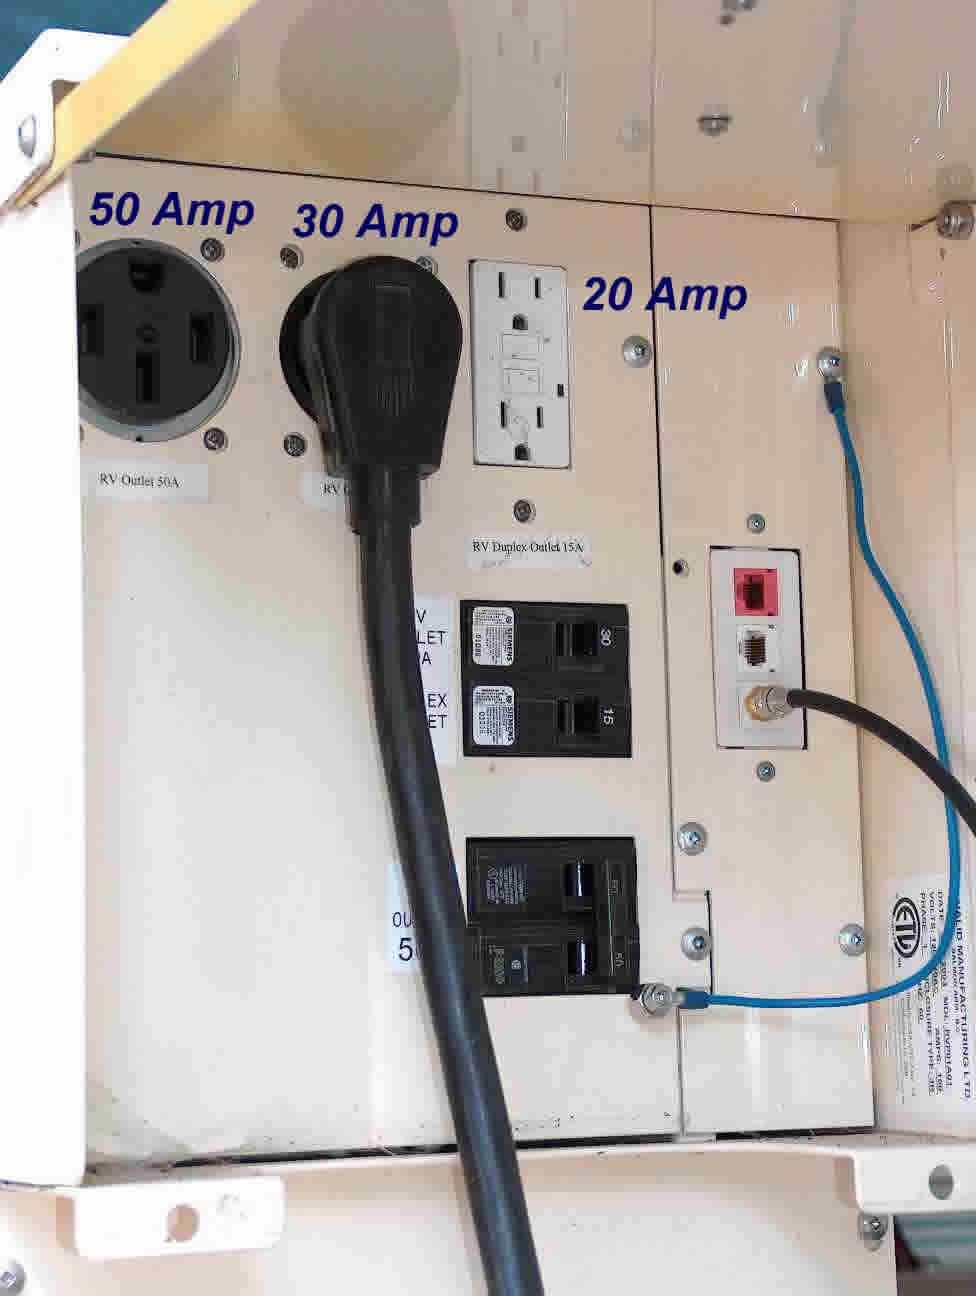 30 Amp To 50 Amp Adapter Wiring Diagram – Simple Wiring Diagram - 50 Amp Rv Plug Wiring Diagram